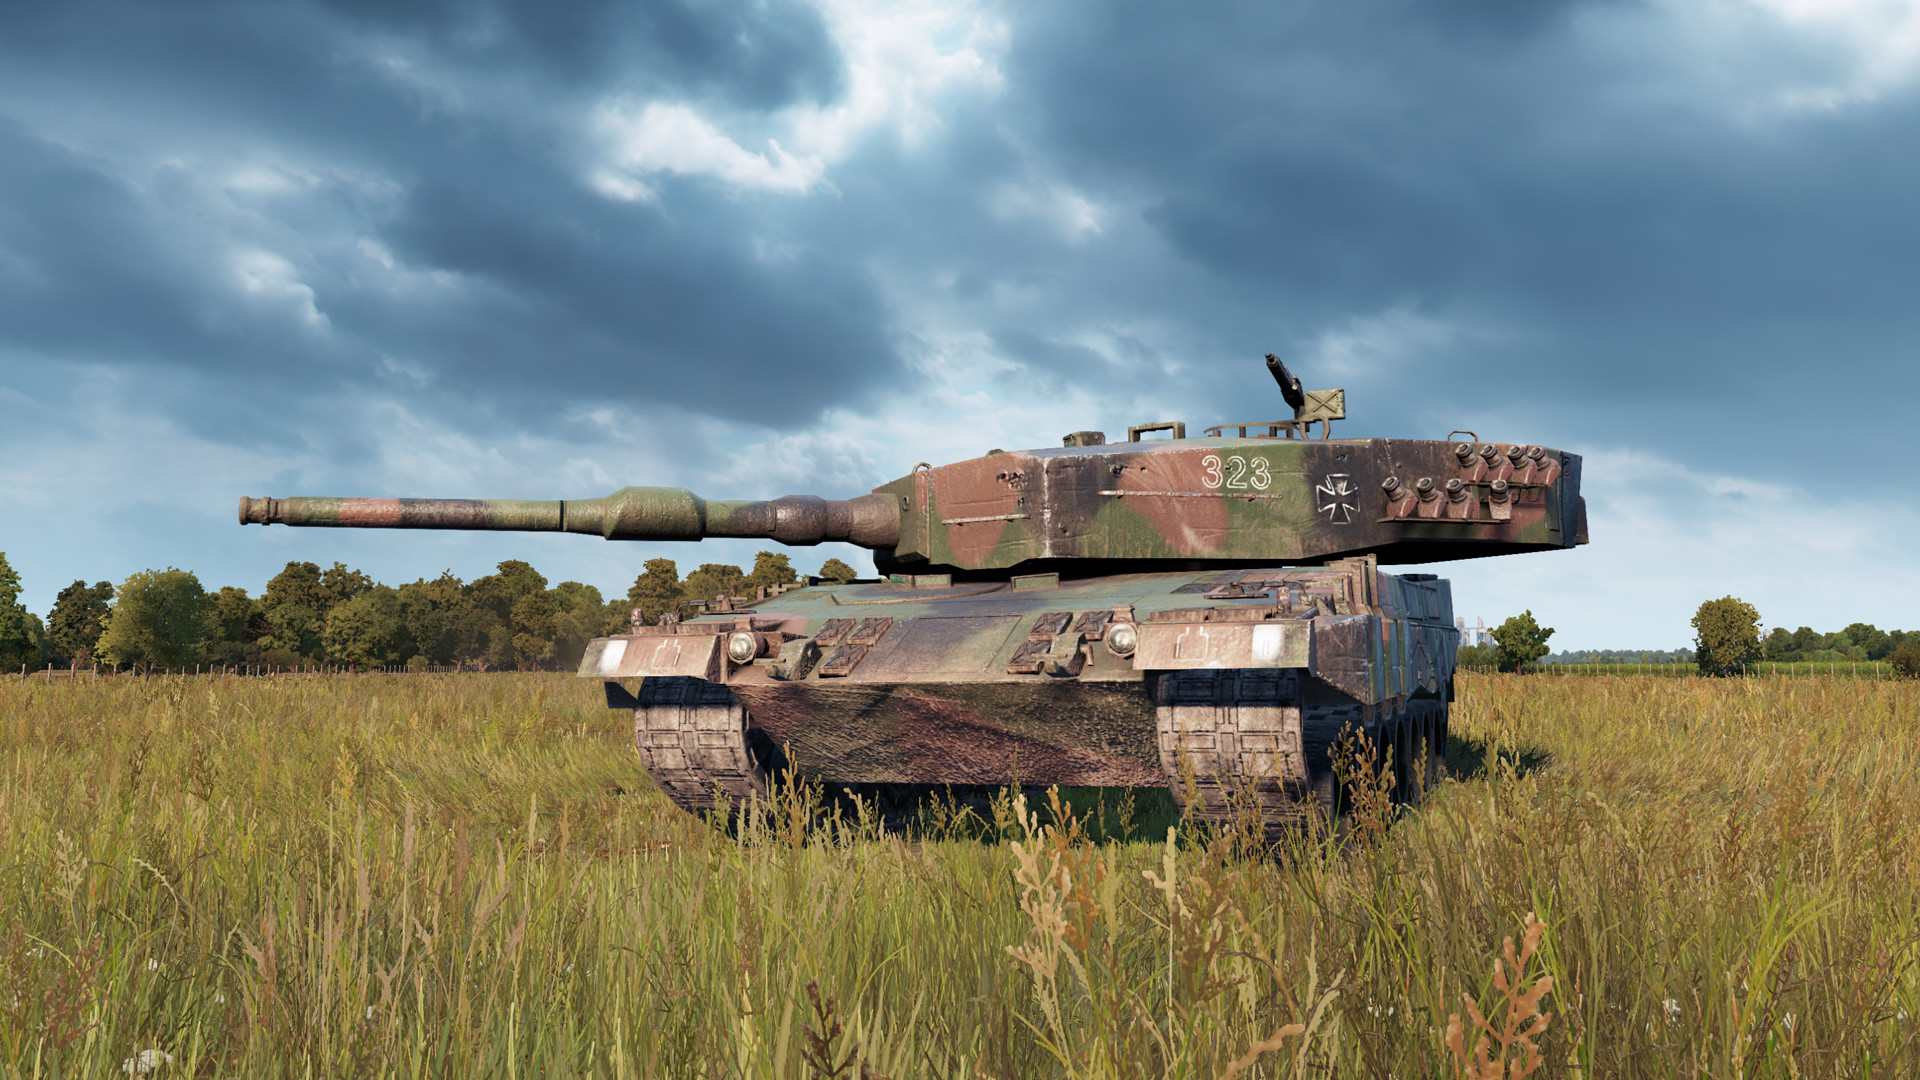 World of Tanks is rolling onto Steam this year